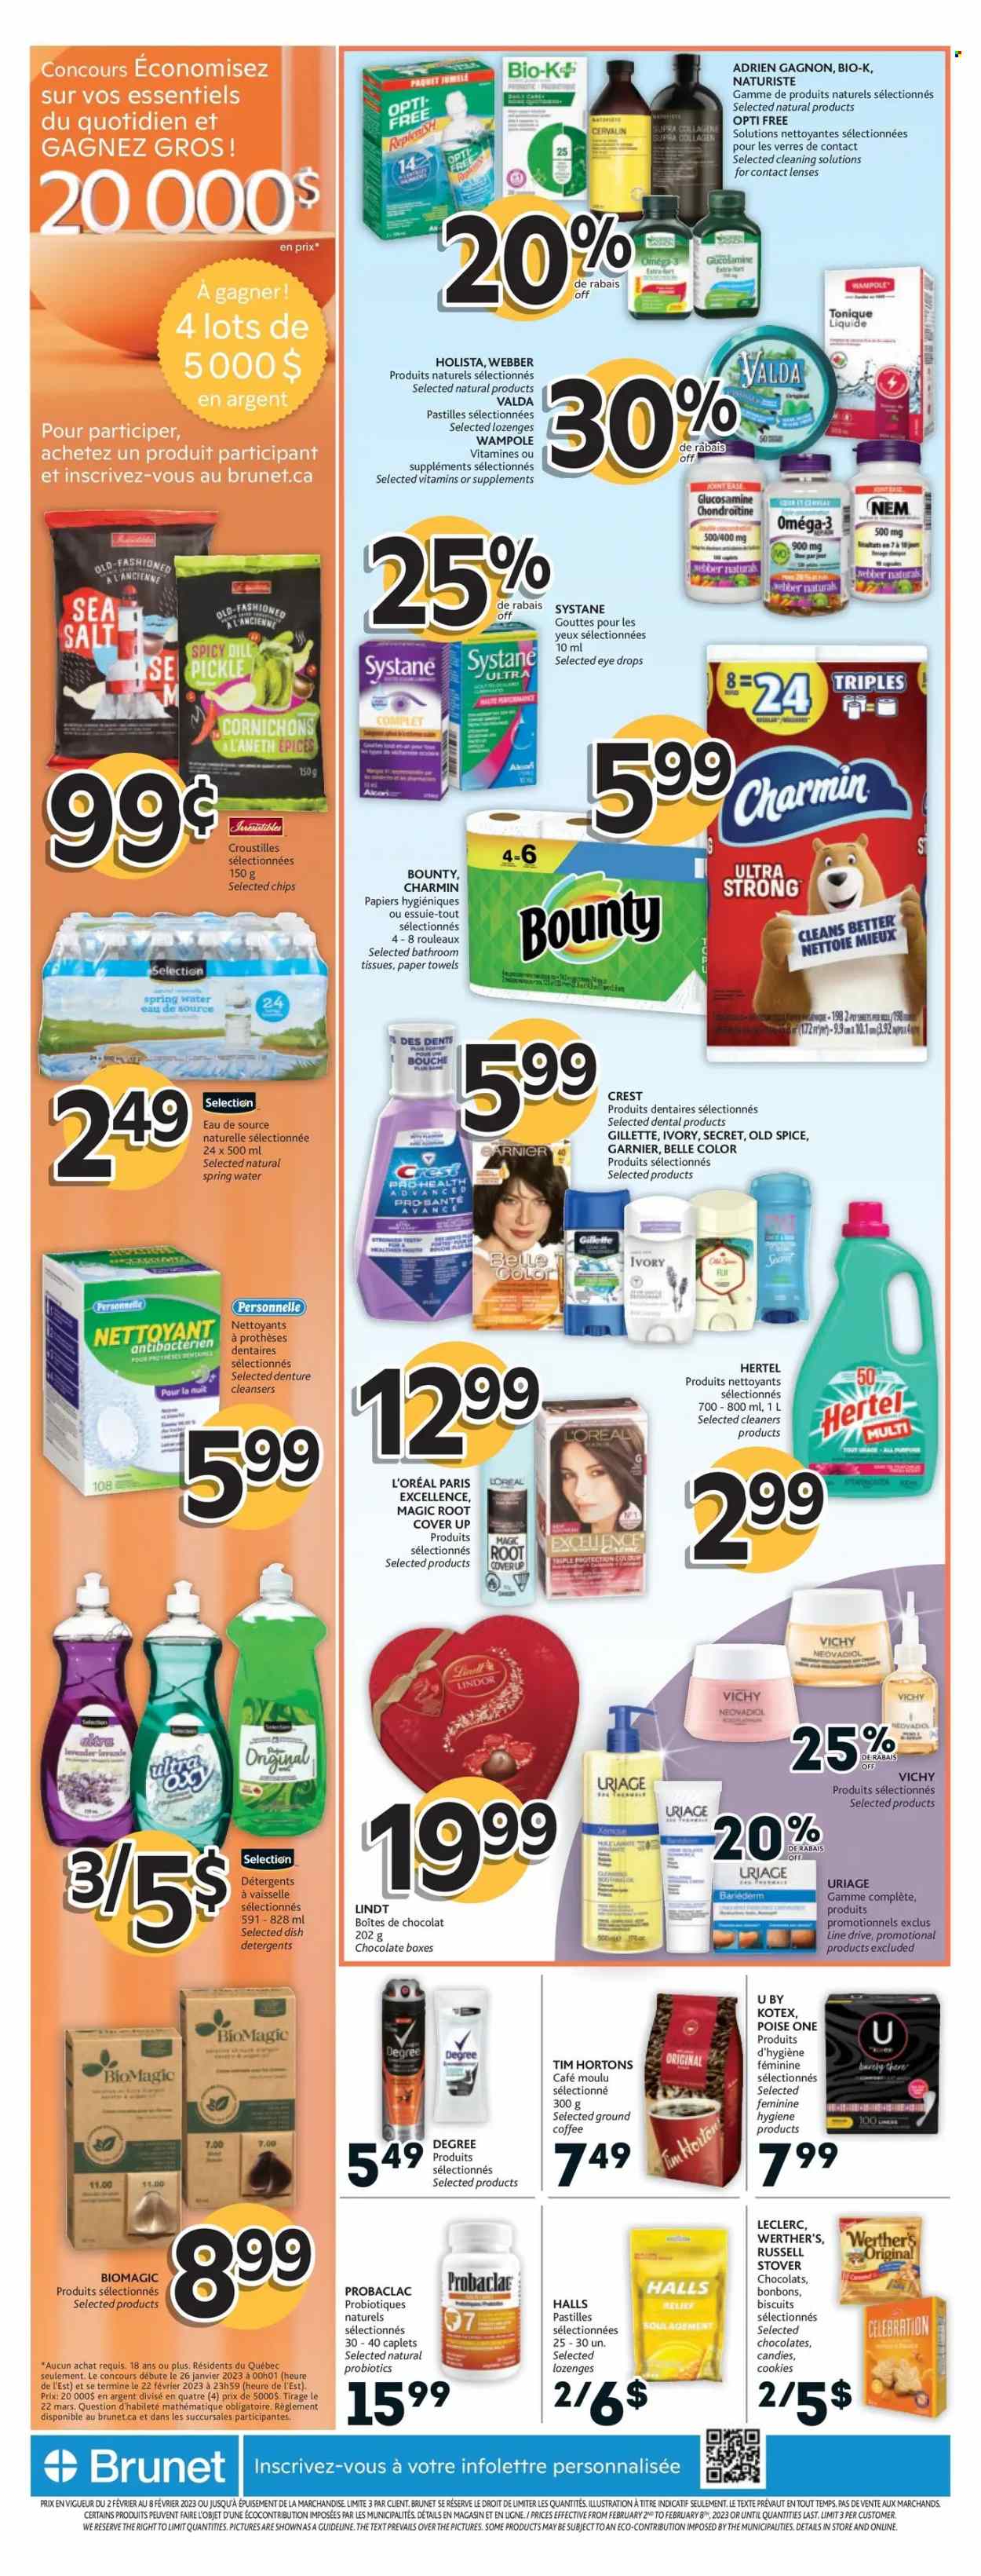 thumbnail - Brunet Flyer - February 02, 2023 - February 08, 2023 - Sales products - cookies, Halls, chocolate, Bounty, Mars, Celebration, biscuit, pastilles, chips, spring water, coffee, ground coffee, toilet paper, tissues, kitchen towels, paper towels, Charmin, Vichy, Crest, Kotex, Gillette, L’Oréal, glucosamine, probiotics, Omega-3, eye drops, lenses, contact lenses, Garnier, Systane, Old Spice, Lindt, Lindor. Page 1.